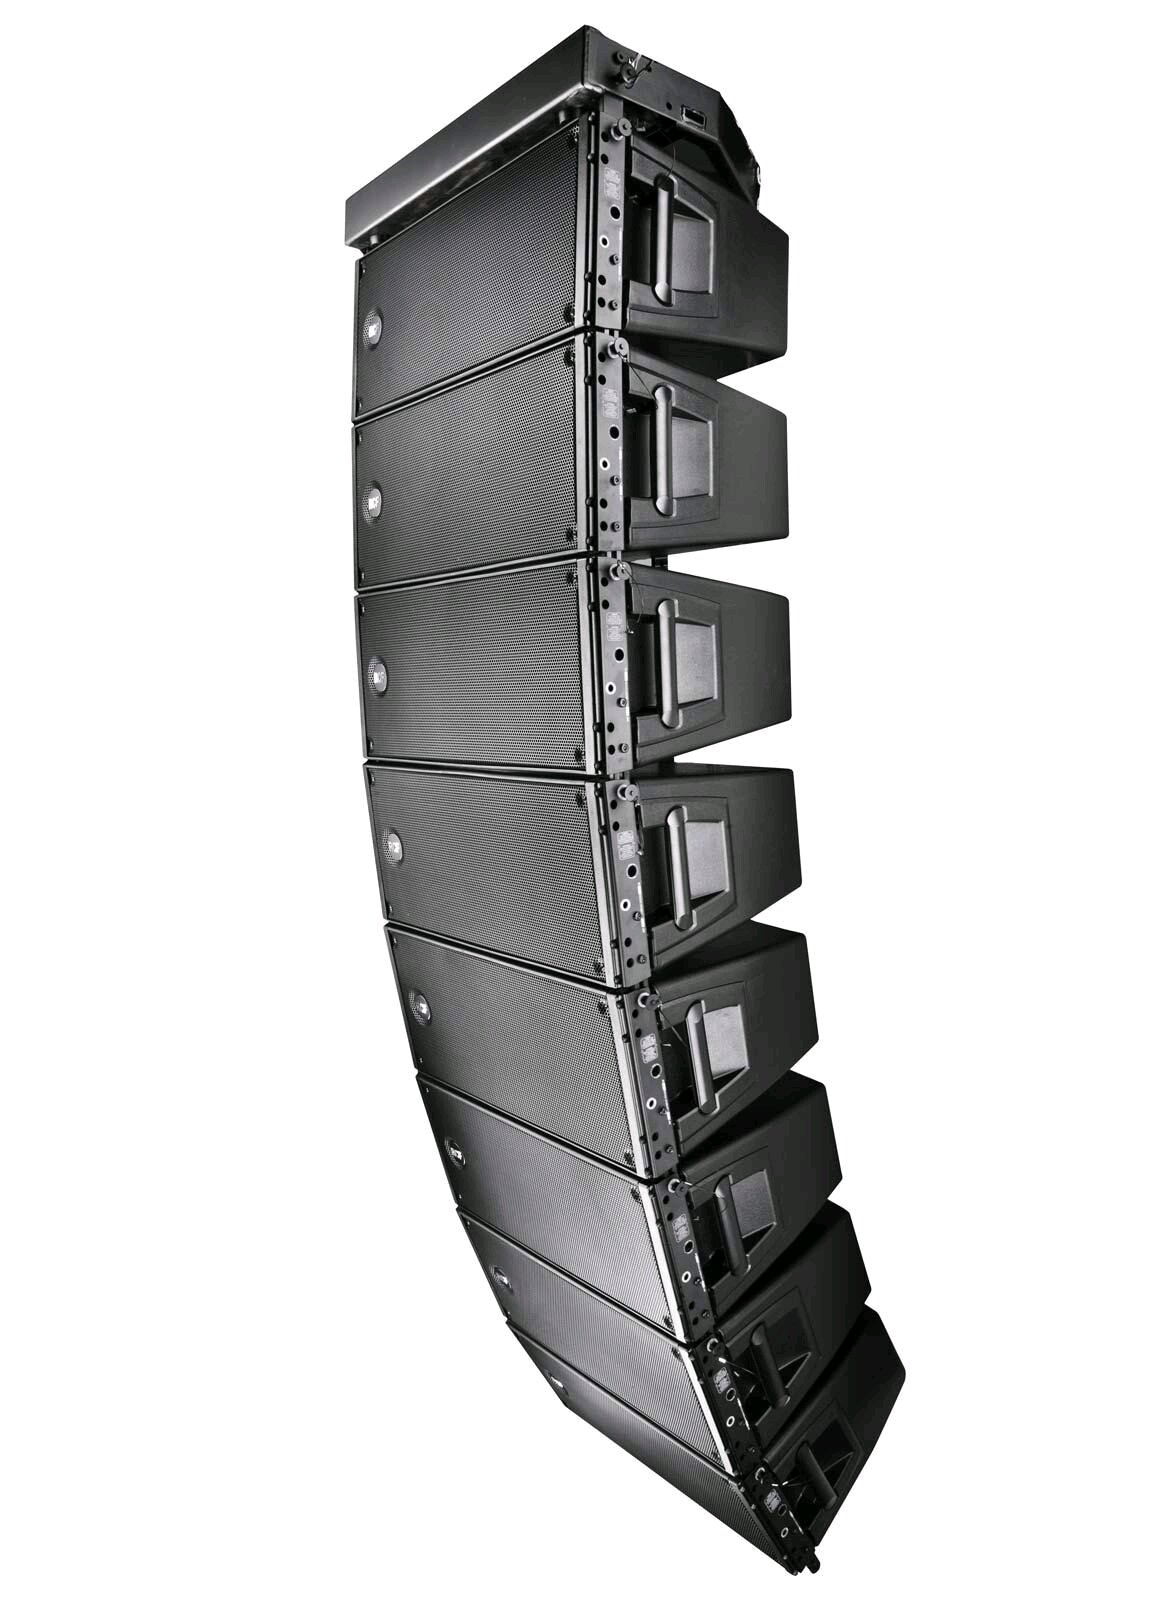 RCF HDL 20-A Active 2-way Line Array Module with 700W RMS amplification, 2x10 